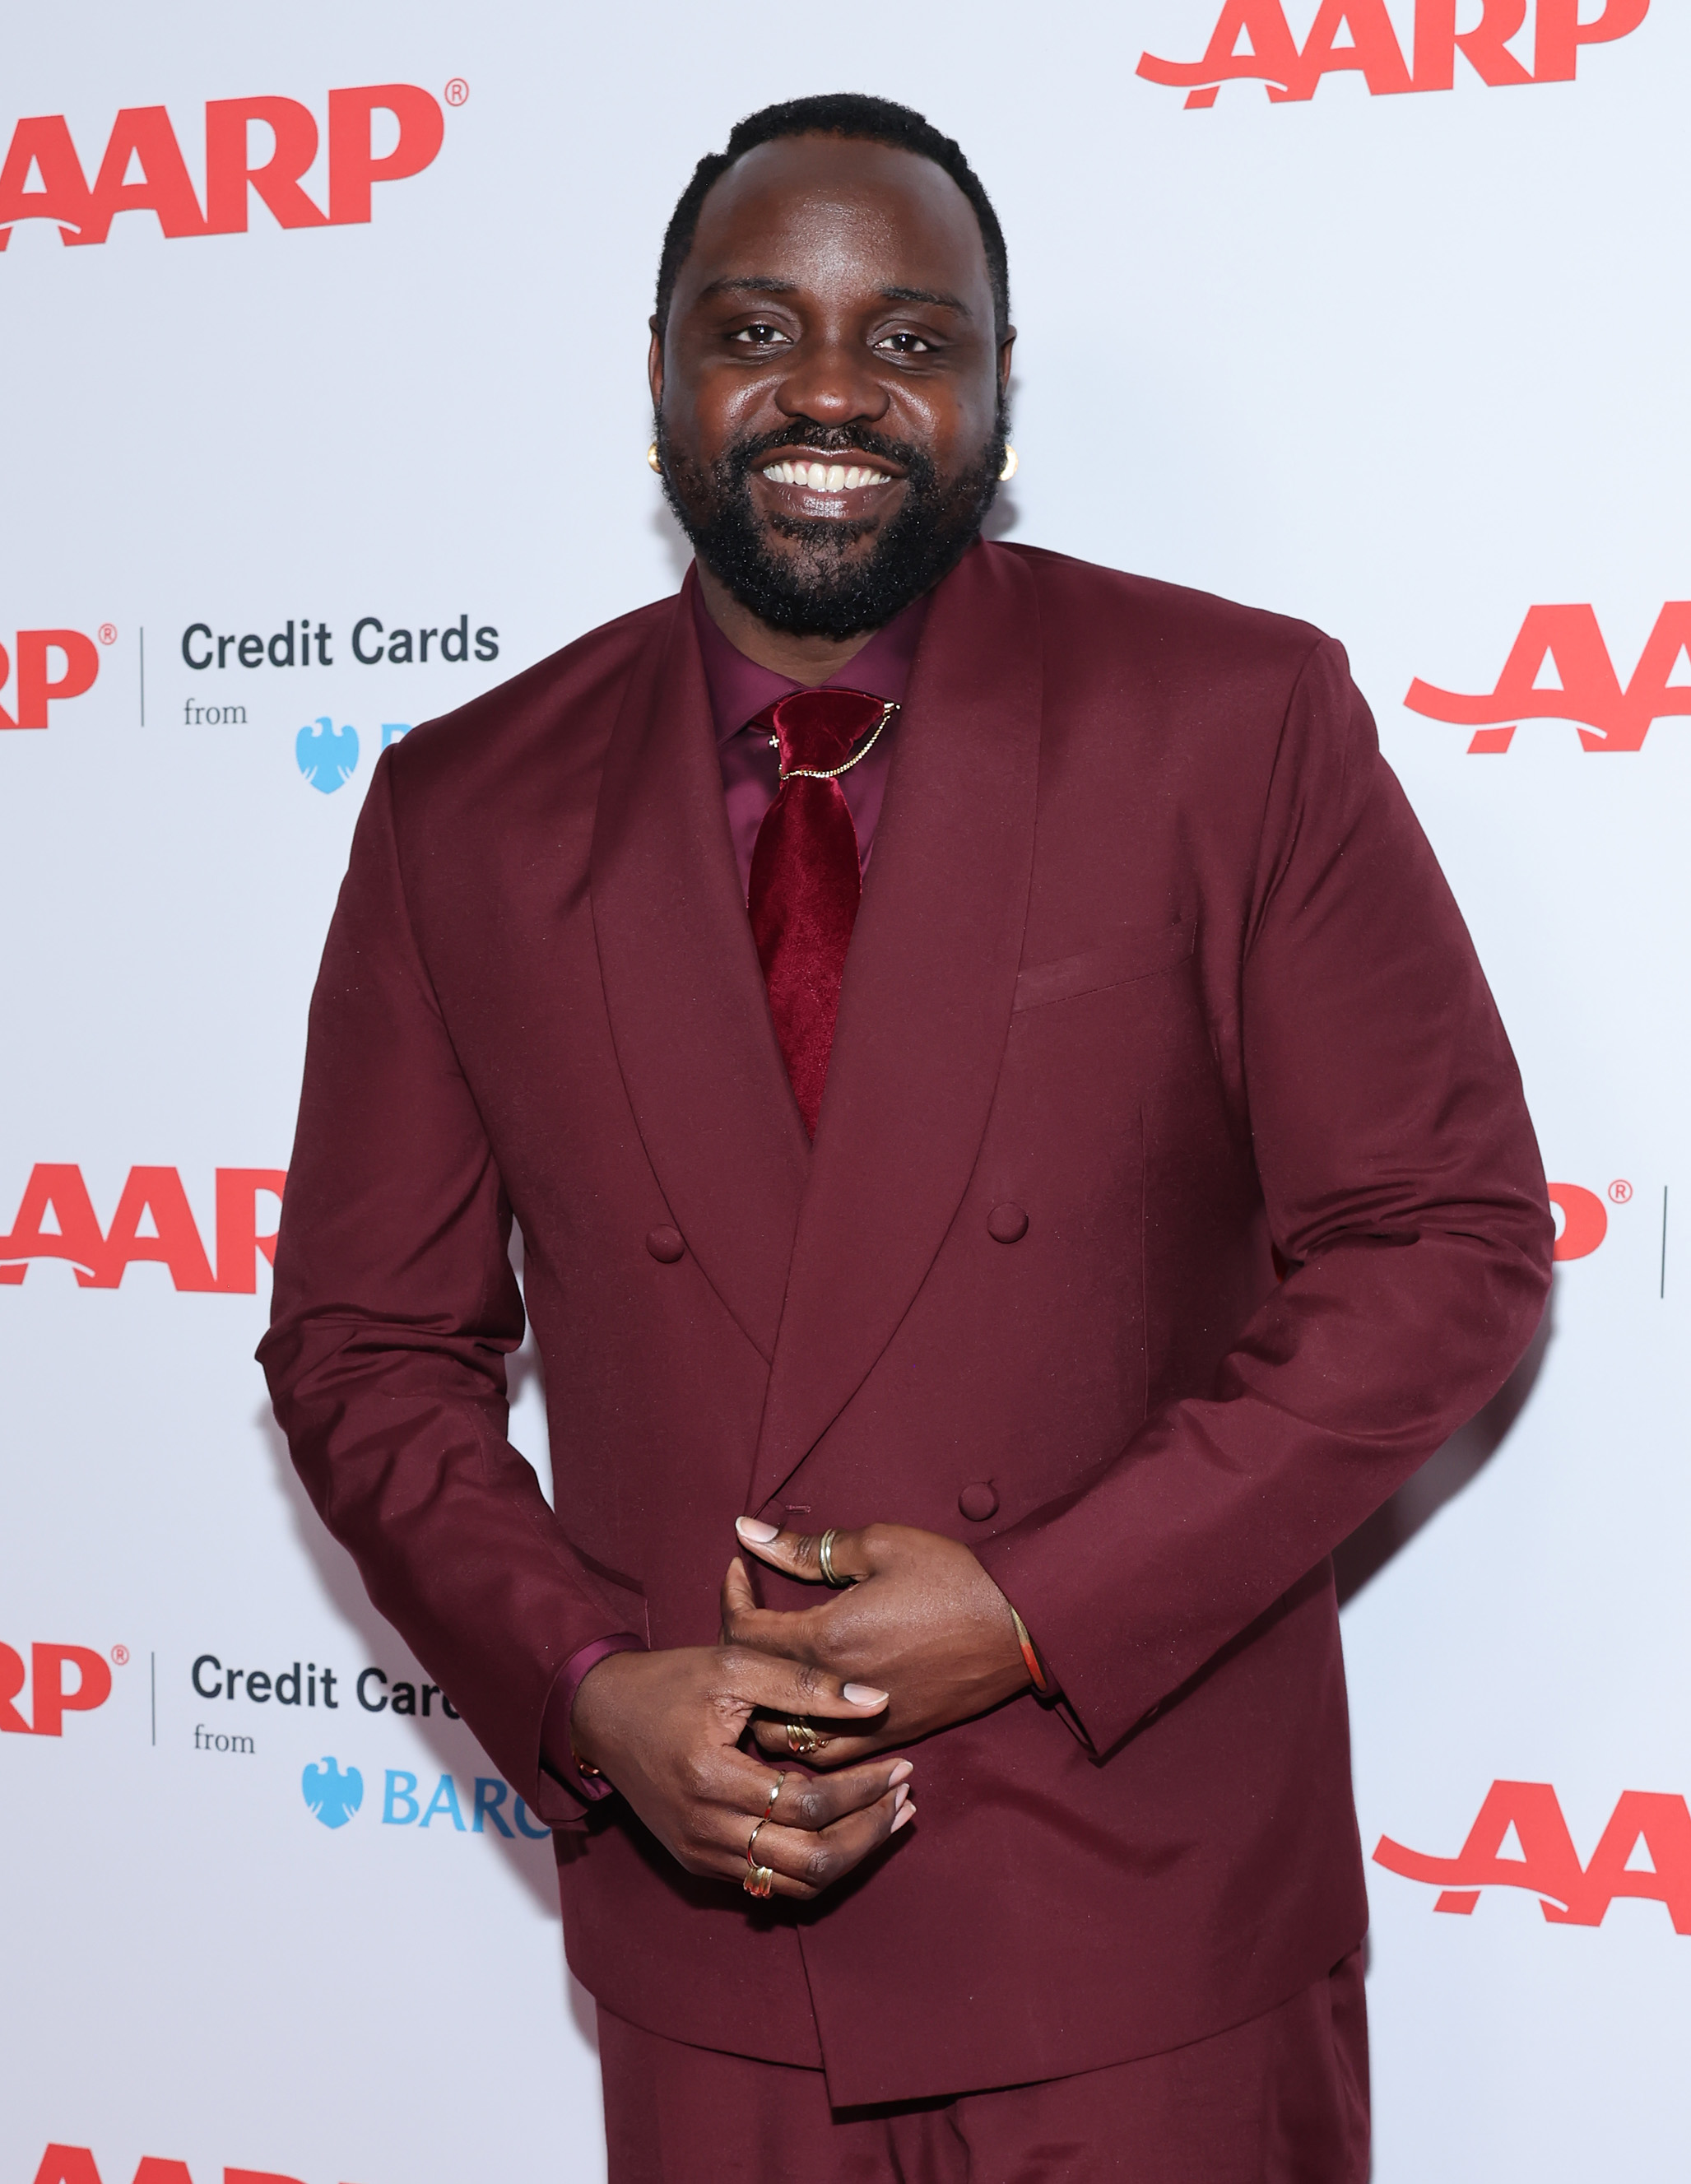 Brian Tyree Henry at the "AARP The Magazine's" 21st Annual Movies for Grownups Awards on January 28, 2023, in Beverly Hills | Source: Getty Images